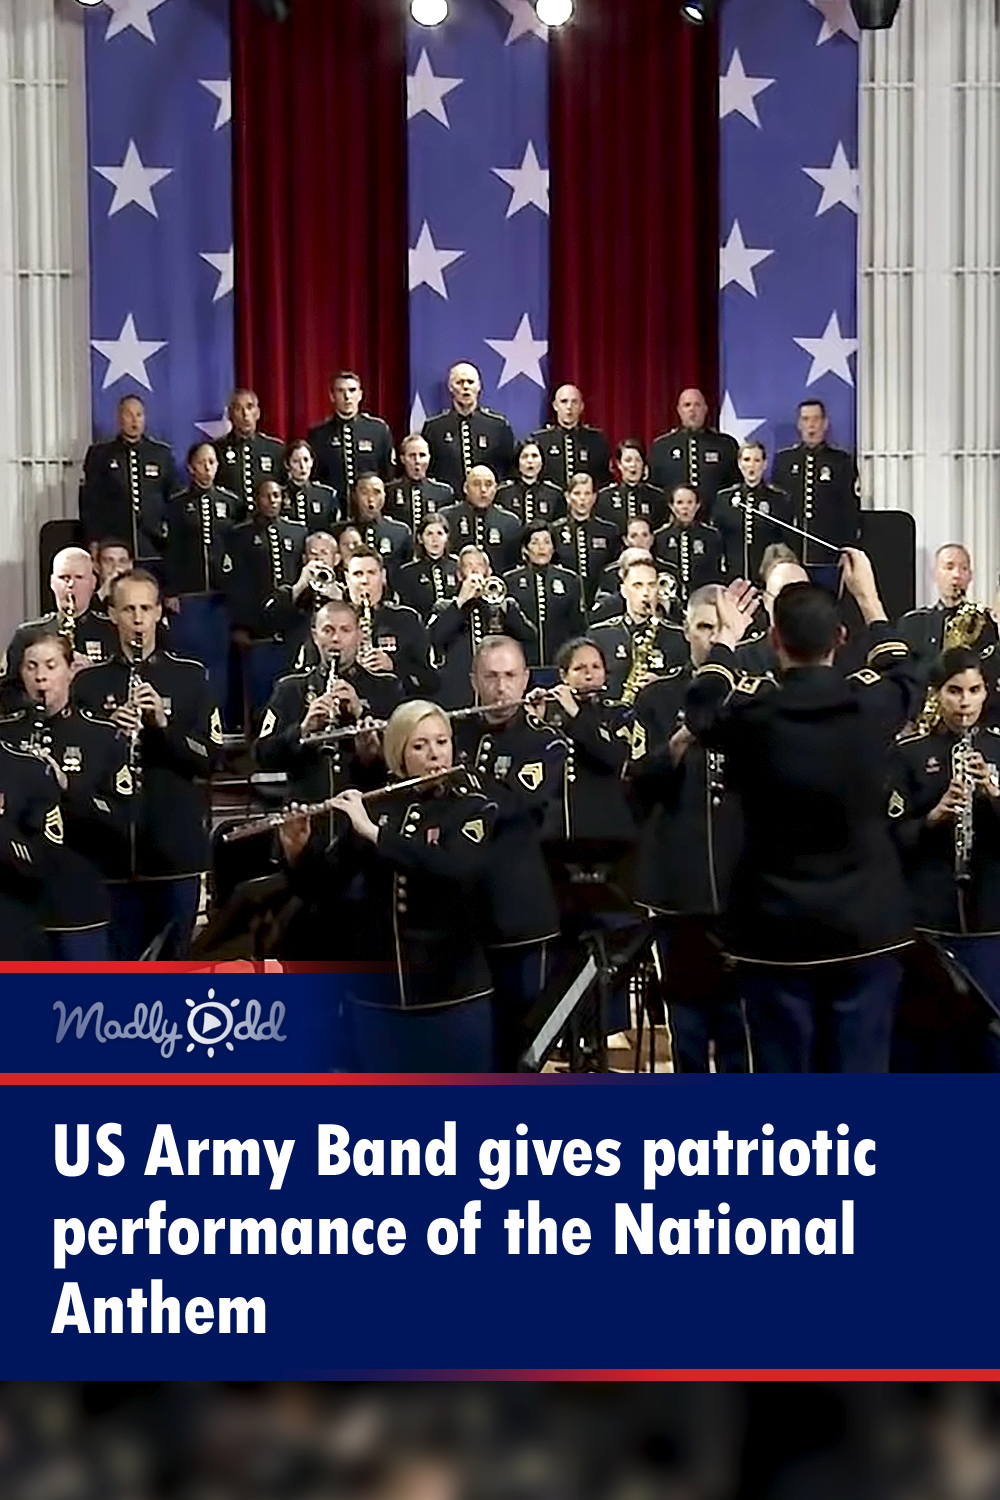 US Army Band gives patriotic performance of the National Anthem